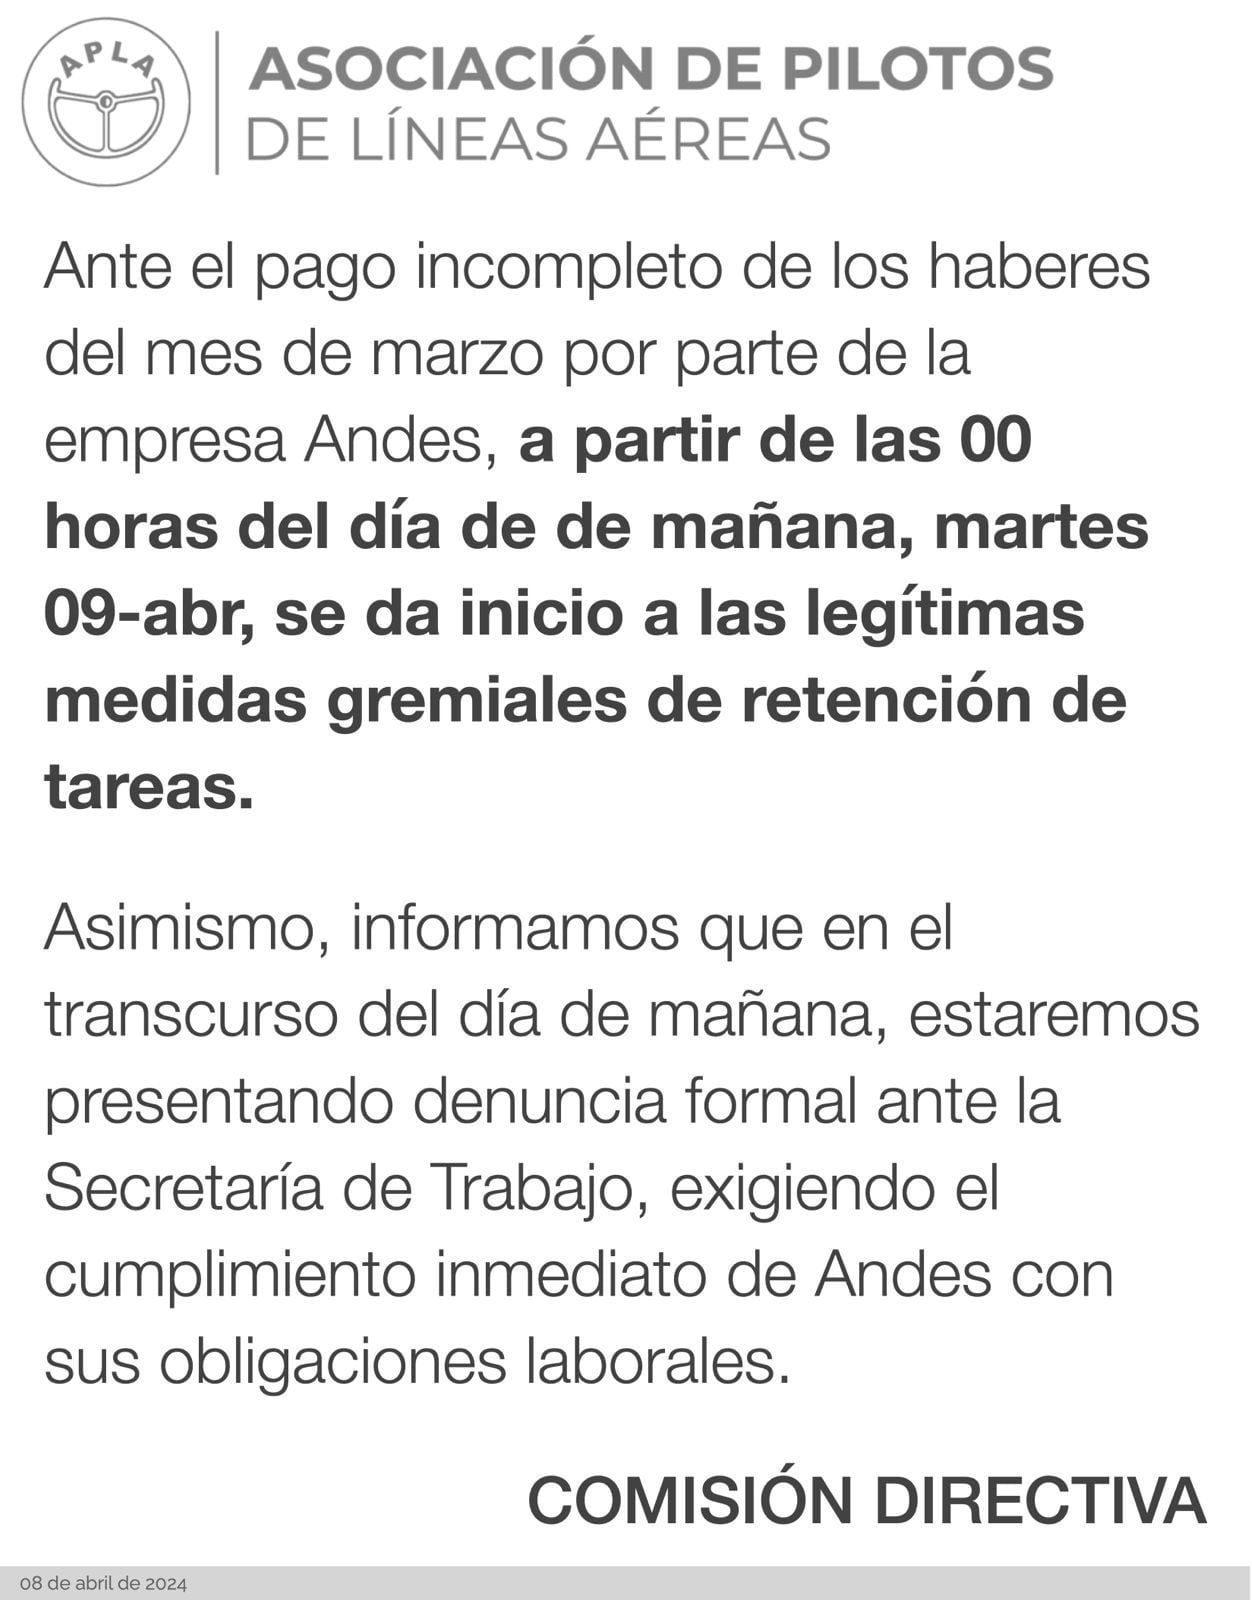 APLA Andes